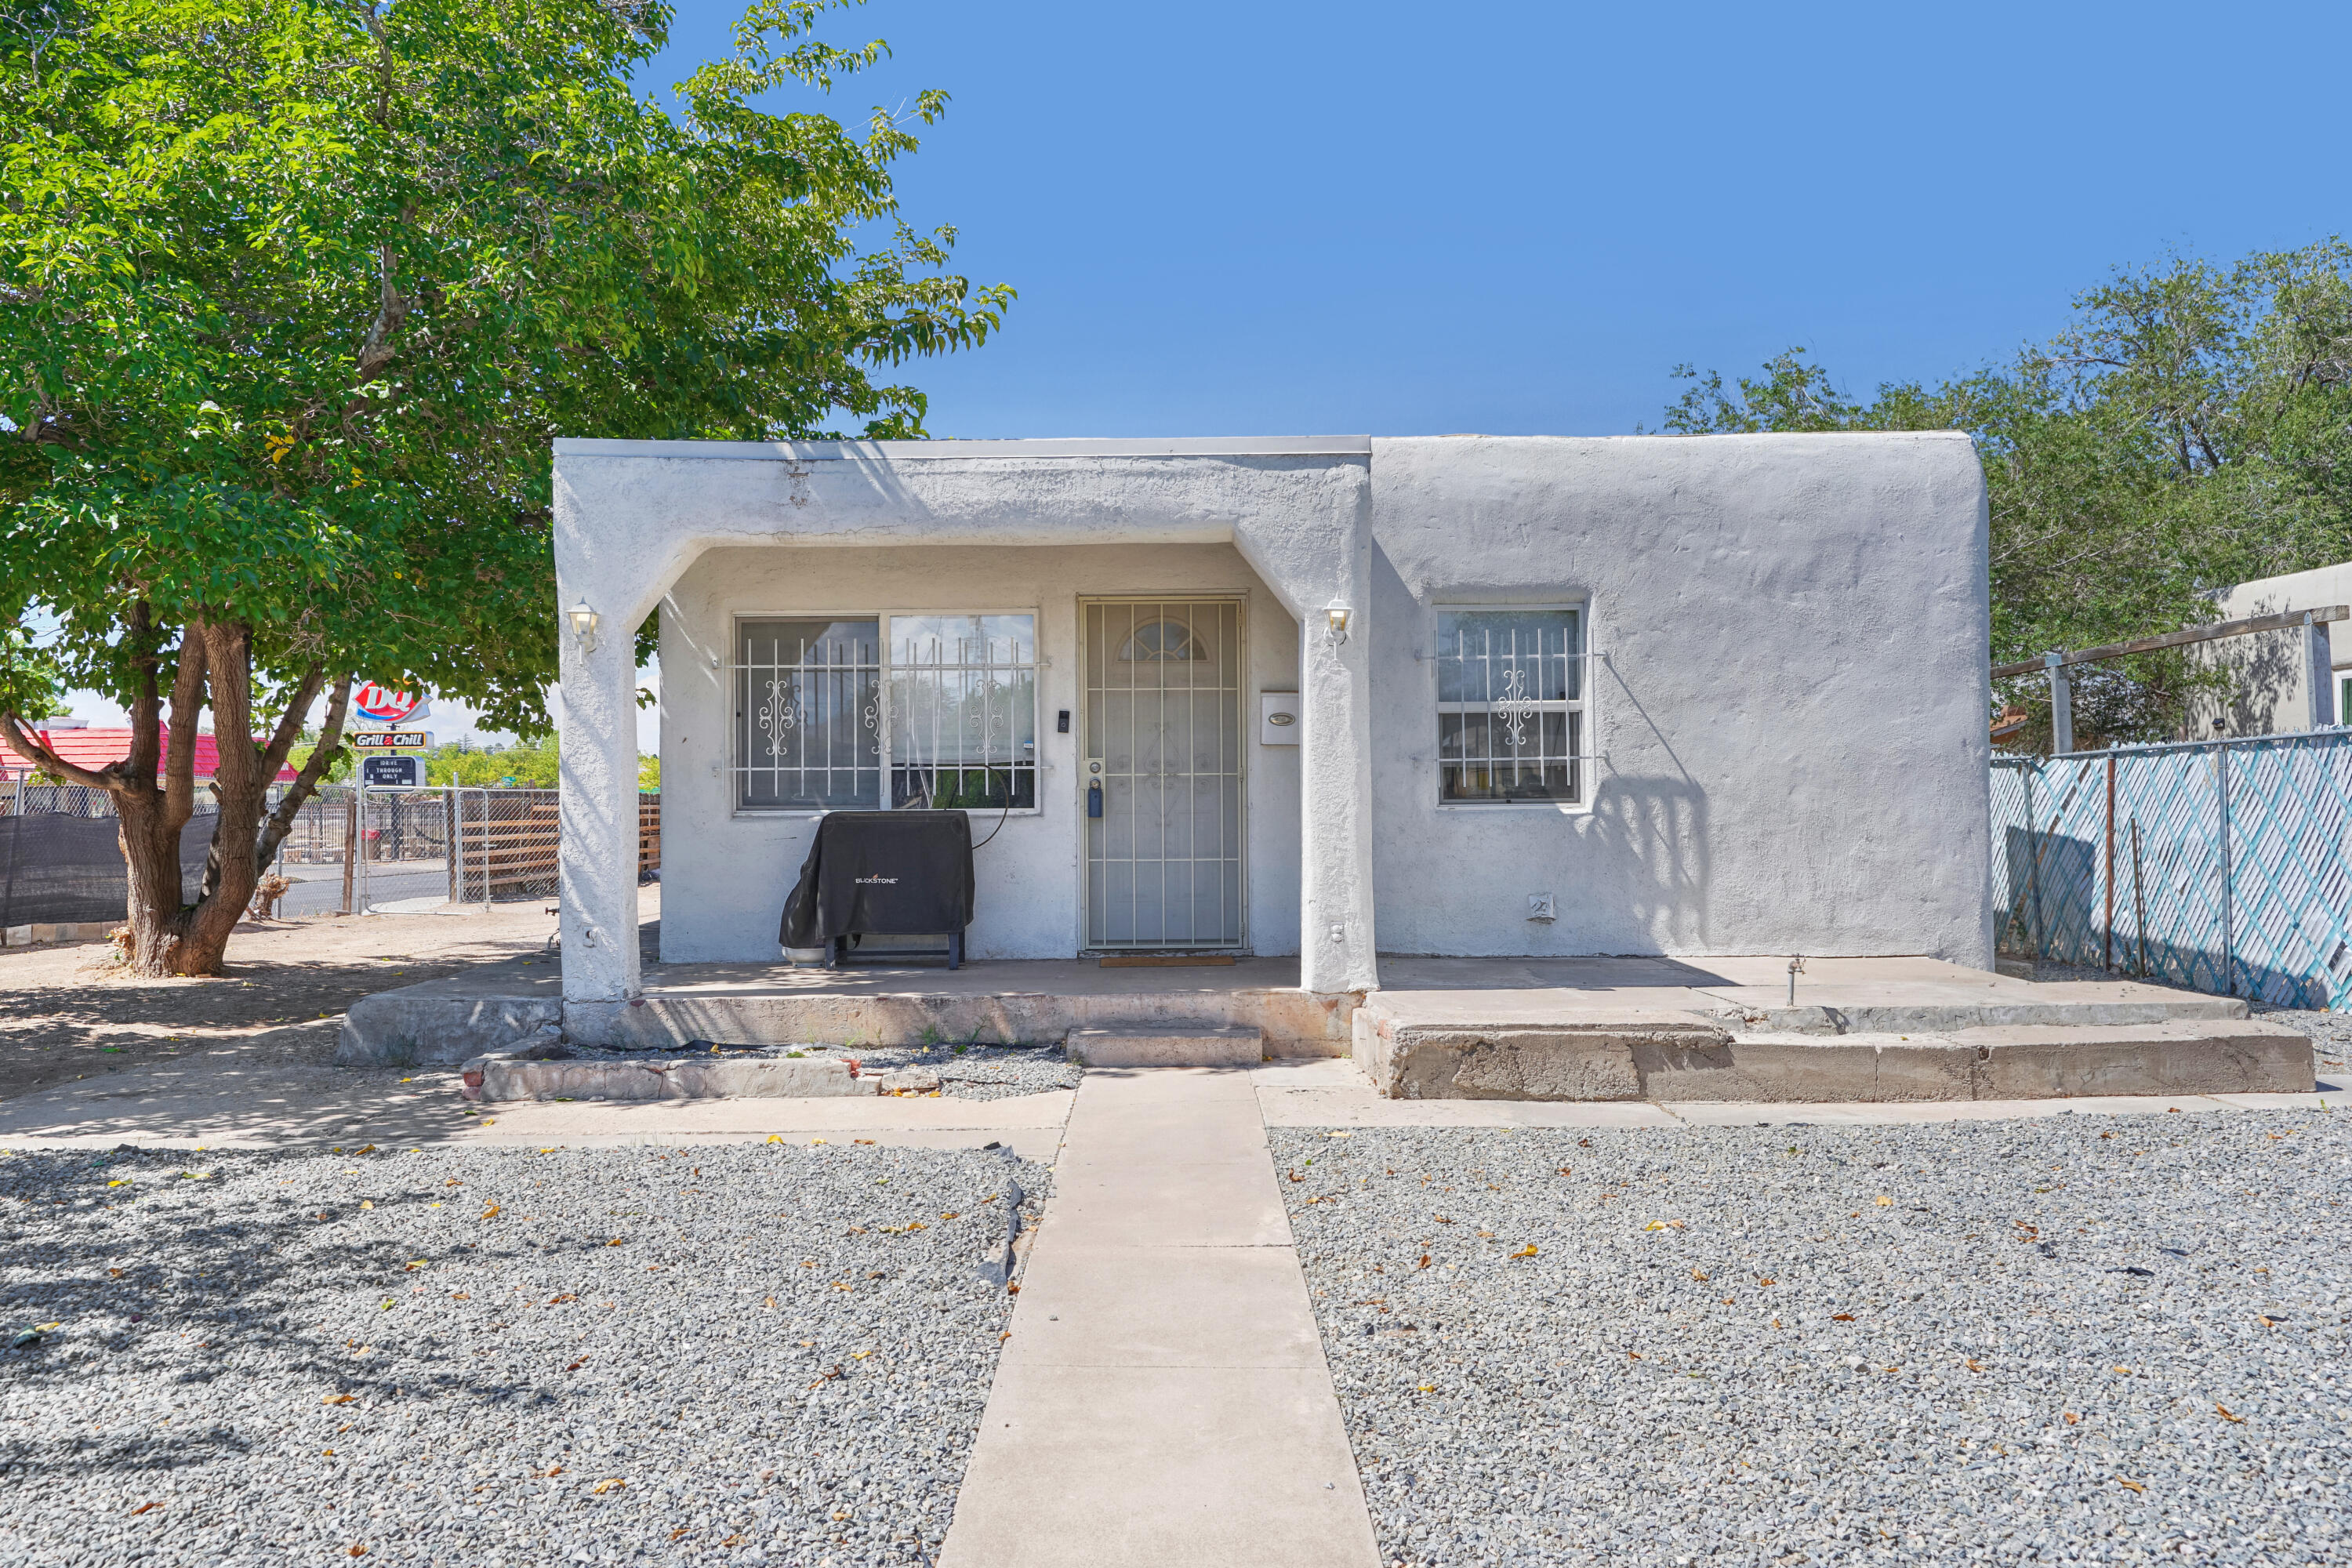 Welcome to this beautifully redone home, less than 10 minutes to UNM.  This home was renovated in 2019 with new flooring, new paint, windows, and a new kitchen and bathroom!  All newer HVAC in 2019 as well with Air Conditioning.  Come see this great move in ready home today!